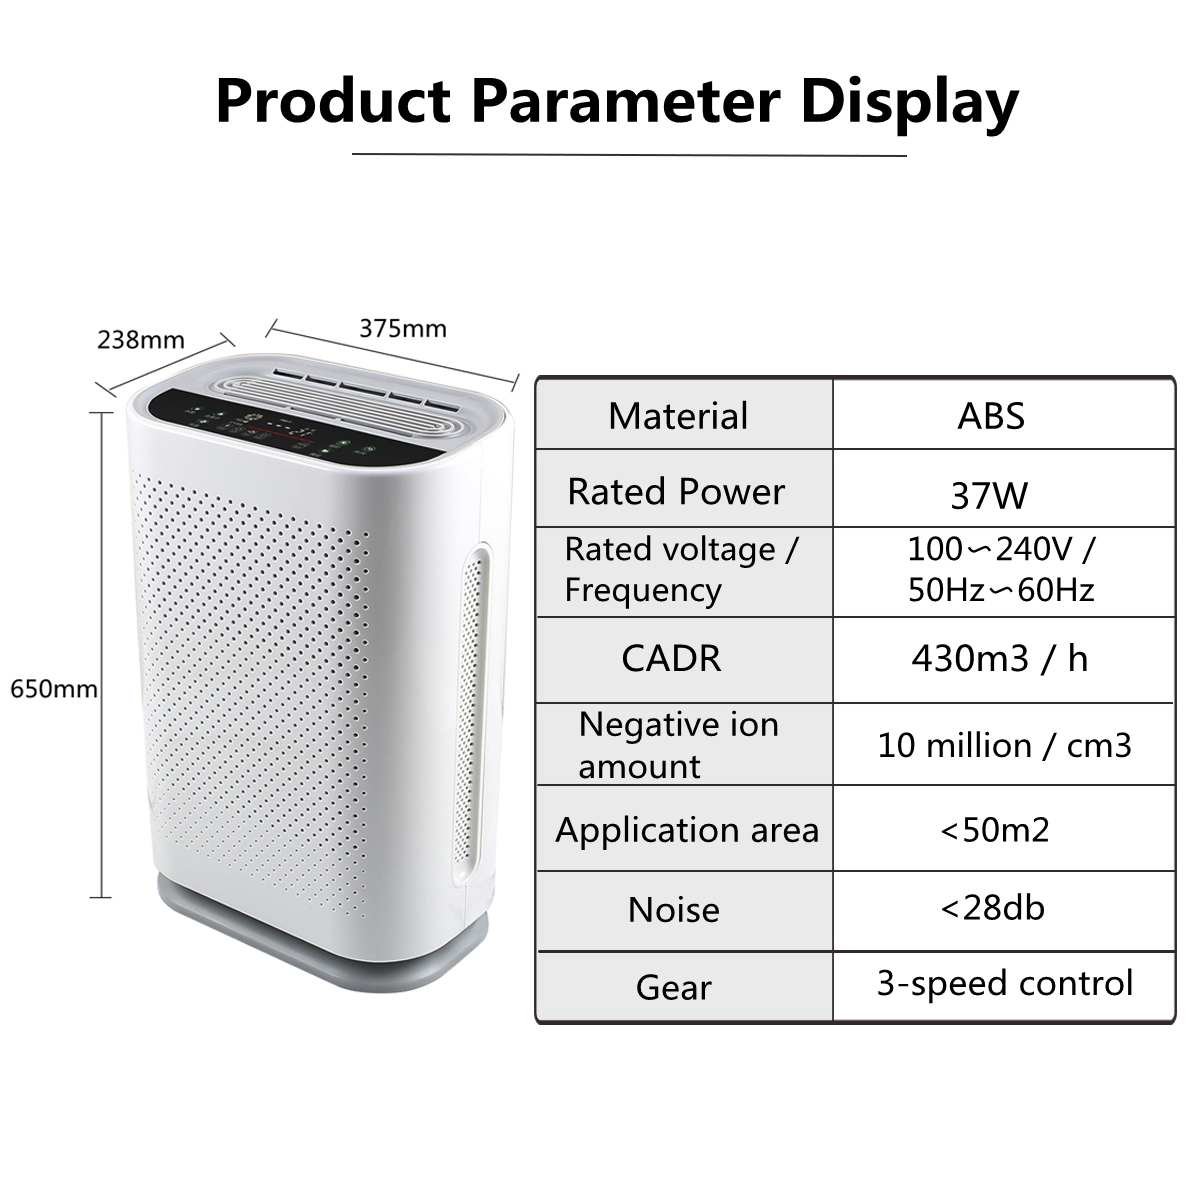 AUGIENB-Smart-Sensor-Air-Purifier-for-Home-Large-Room-With-True-HEPA-Filter-To-Remove-Smoke-Dust-Mol-1710011-9